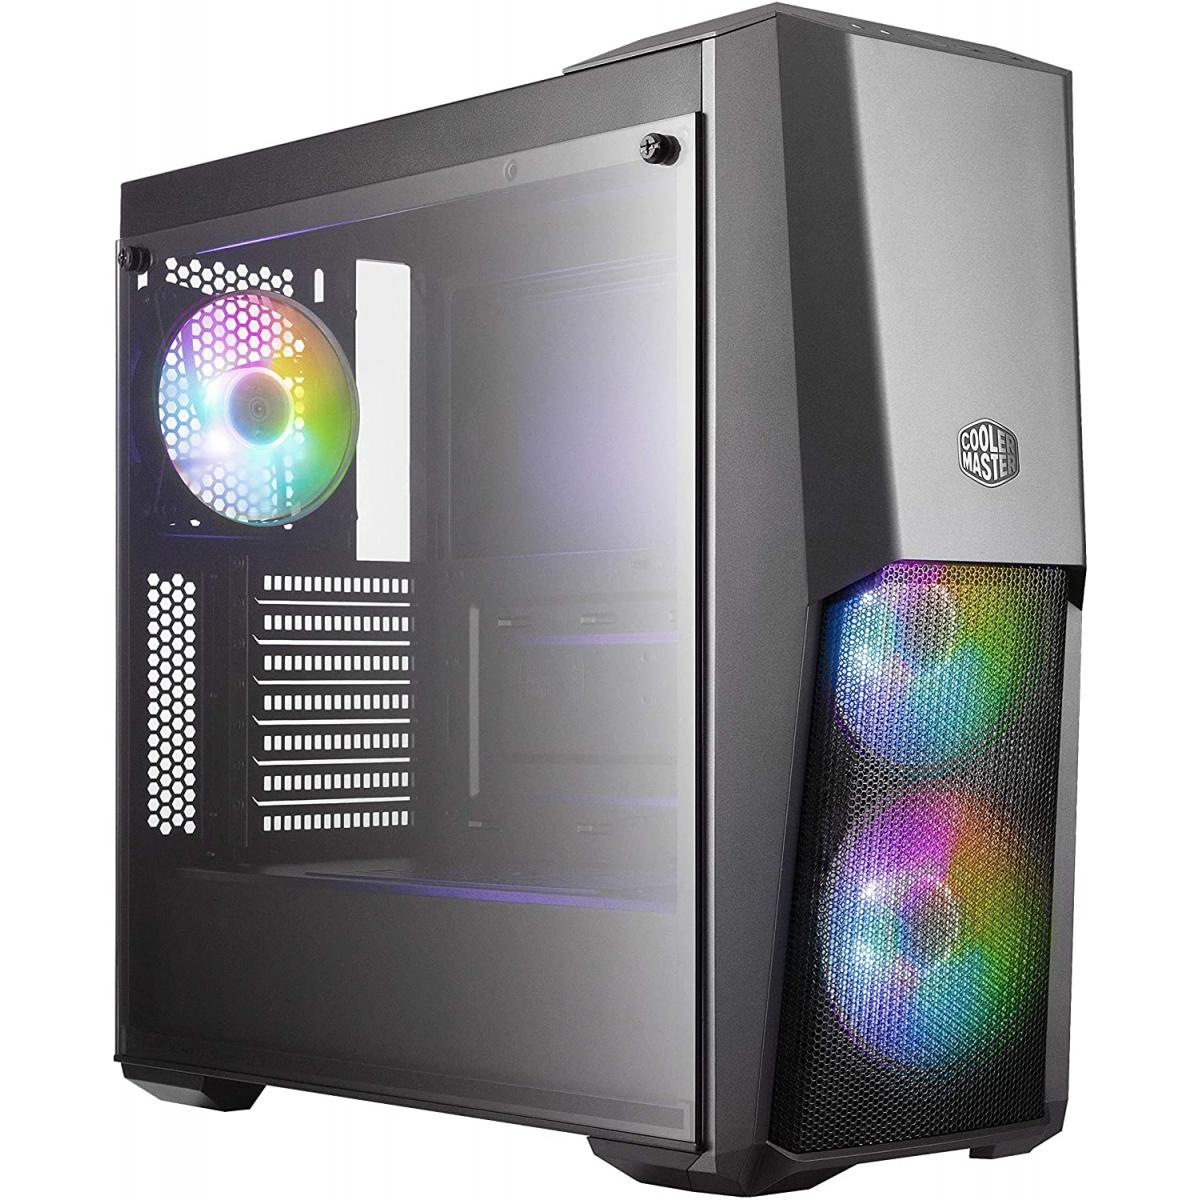 COOLER MASTER COOLER MASTER MASTERBOX MB500 ARGB Mid Tower Tempered Glass Gaming Case